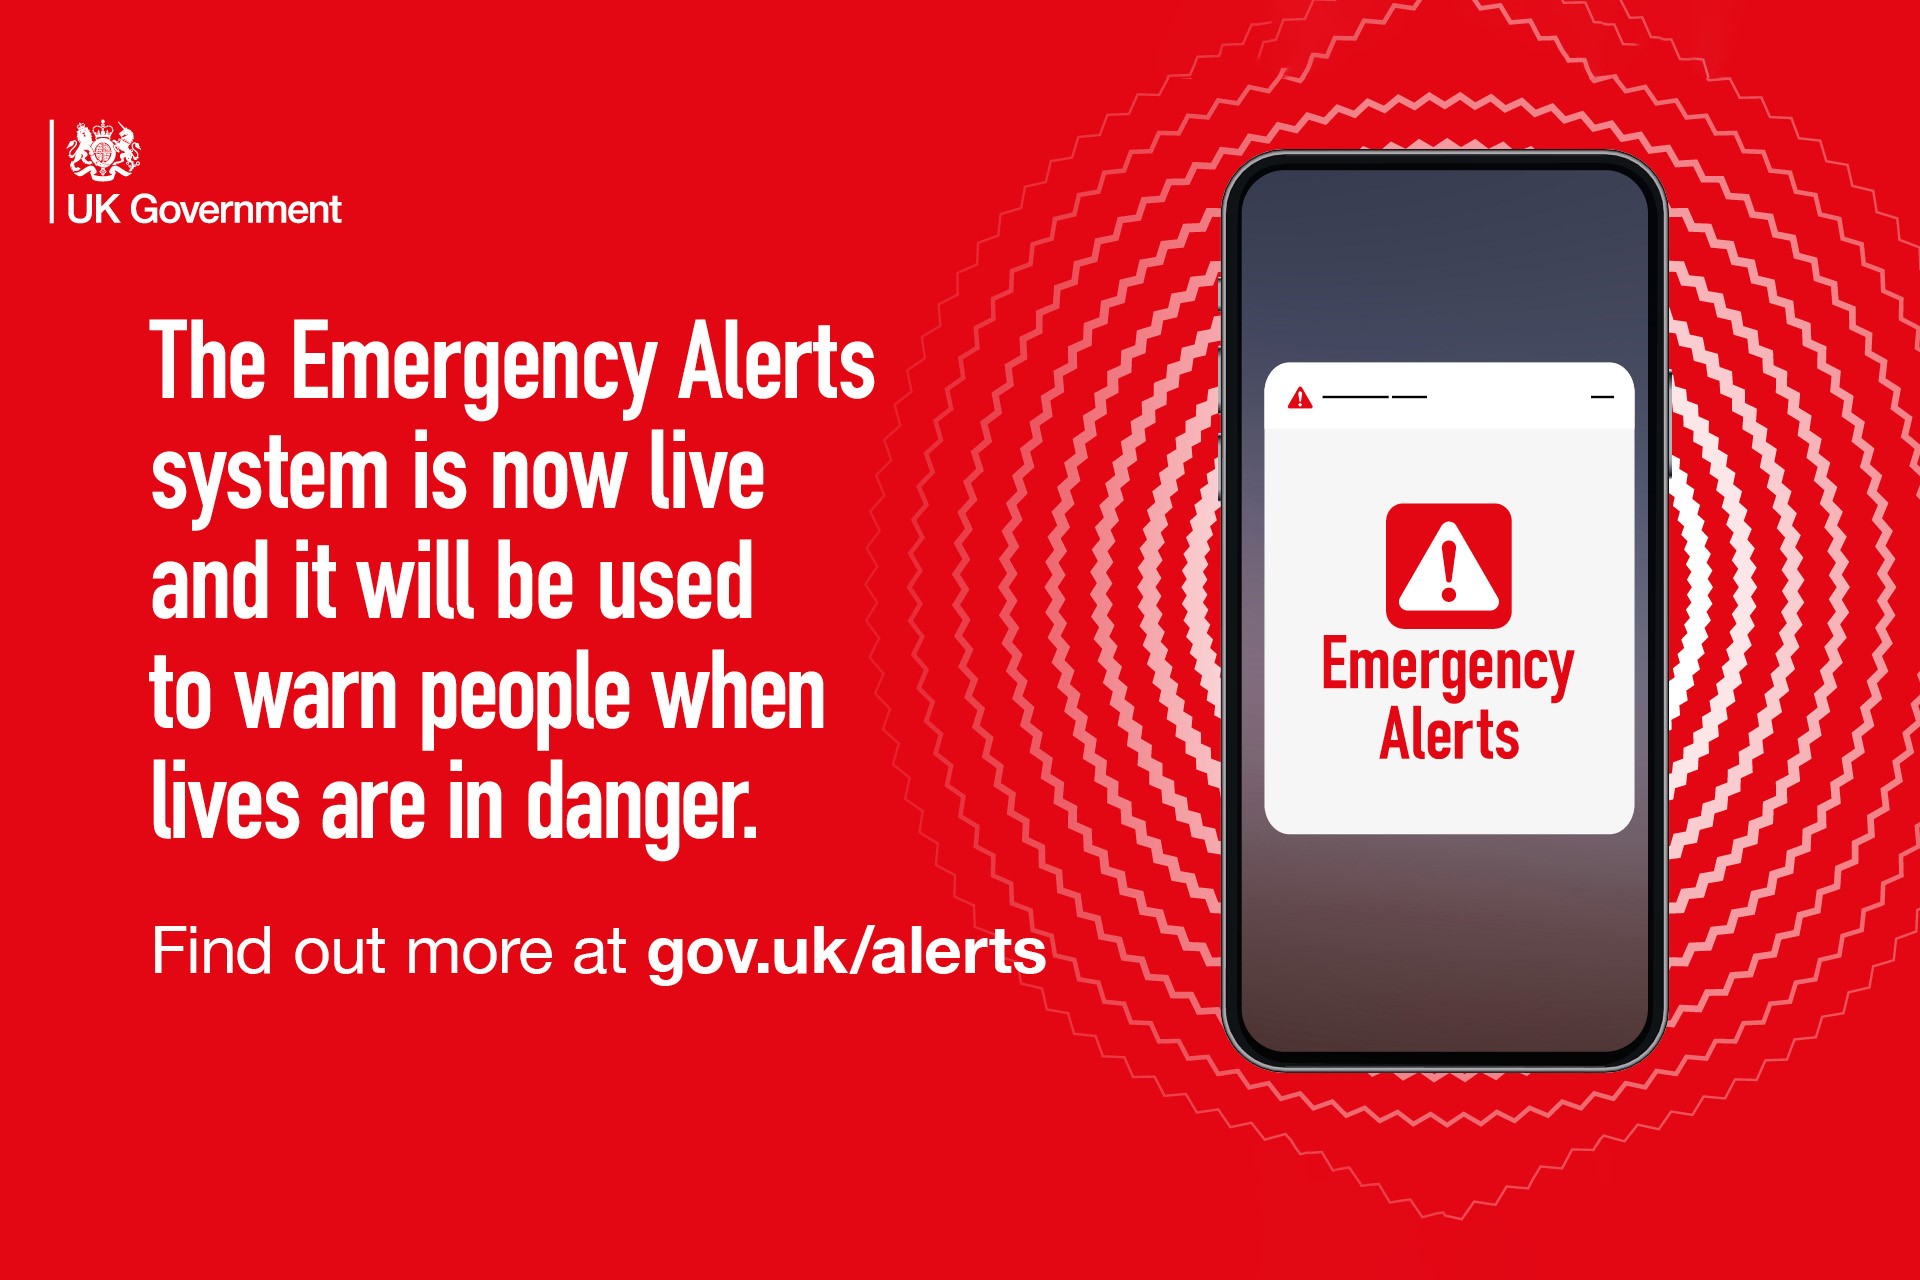 graphic promoting the UK Government's Emergency Alerts service